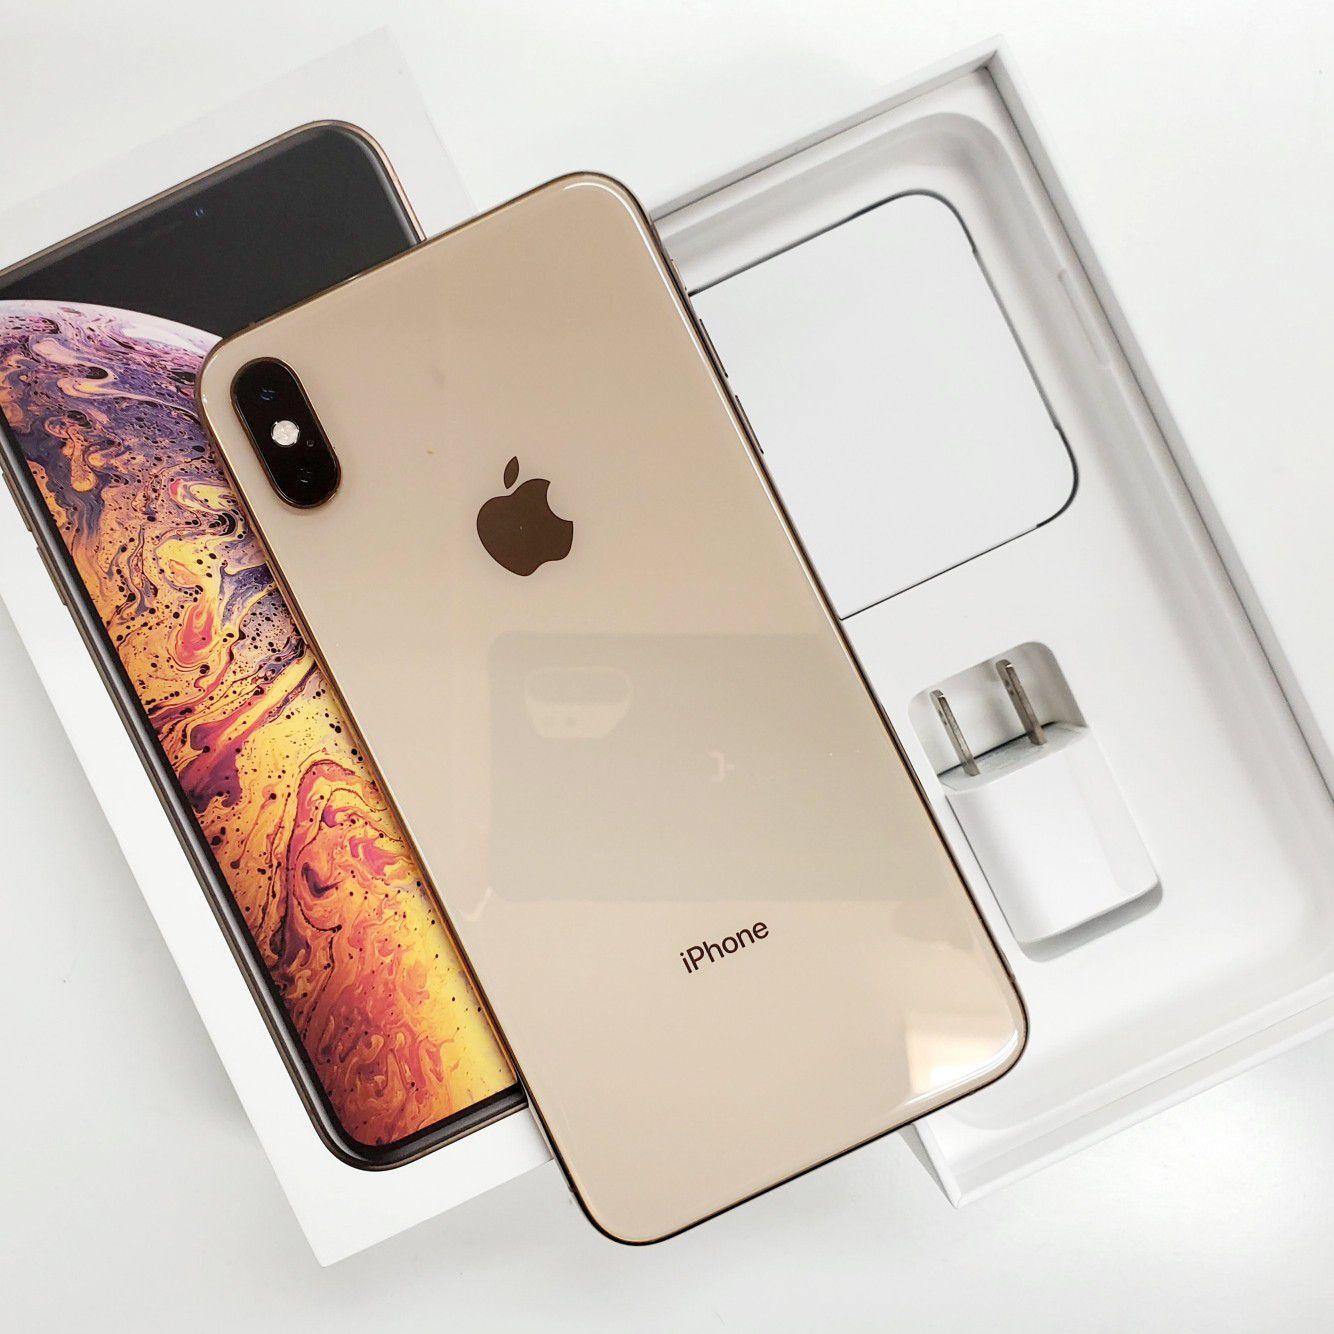 iPhone Xs Max Unlocked To Any Carrier GOLD 512GB